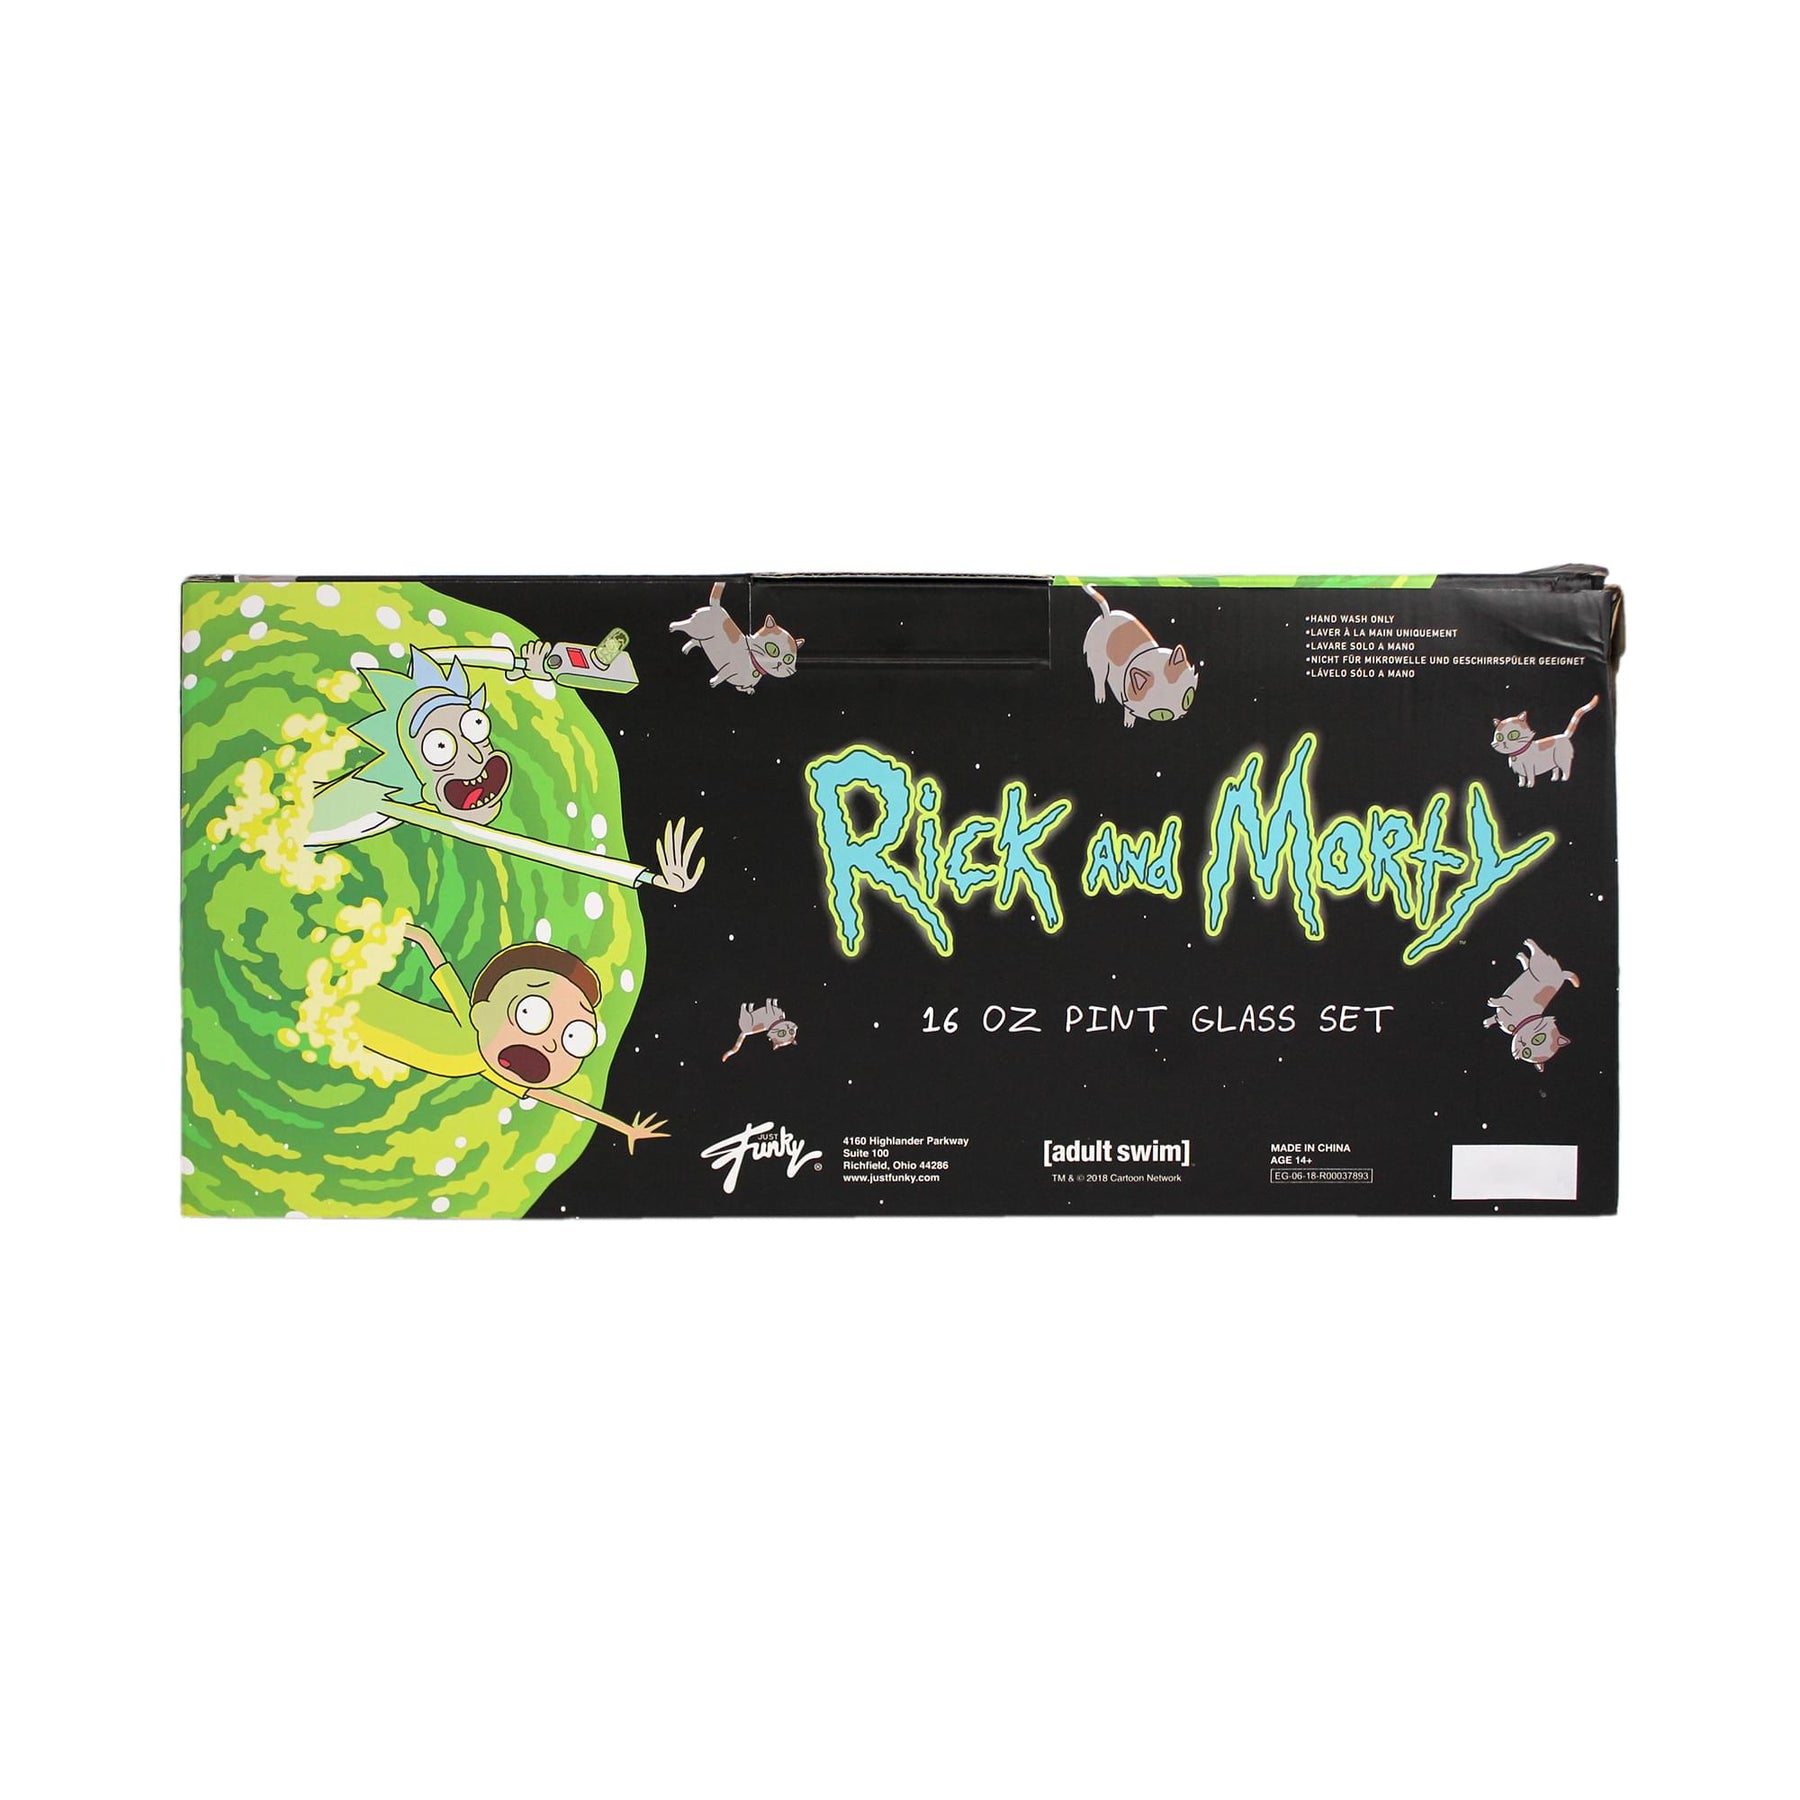 Rick and Morty 16 Ounce Pint Glass Set of 4 | Rick | Morty | Beth | Jerry